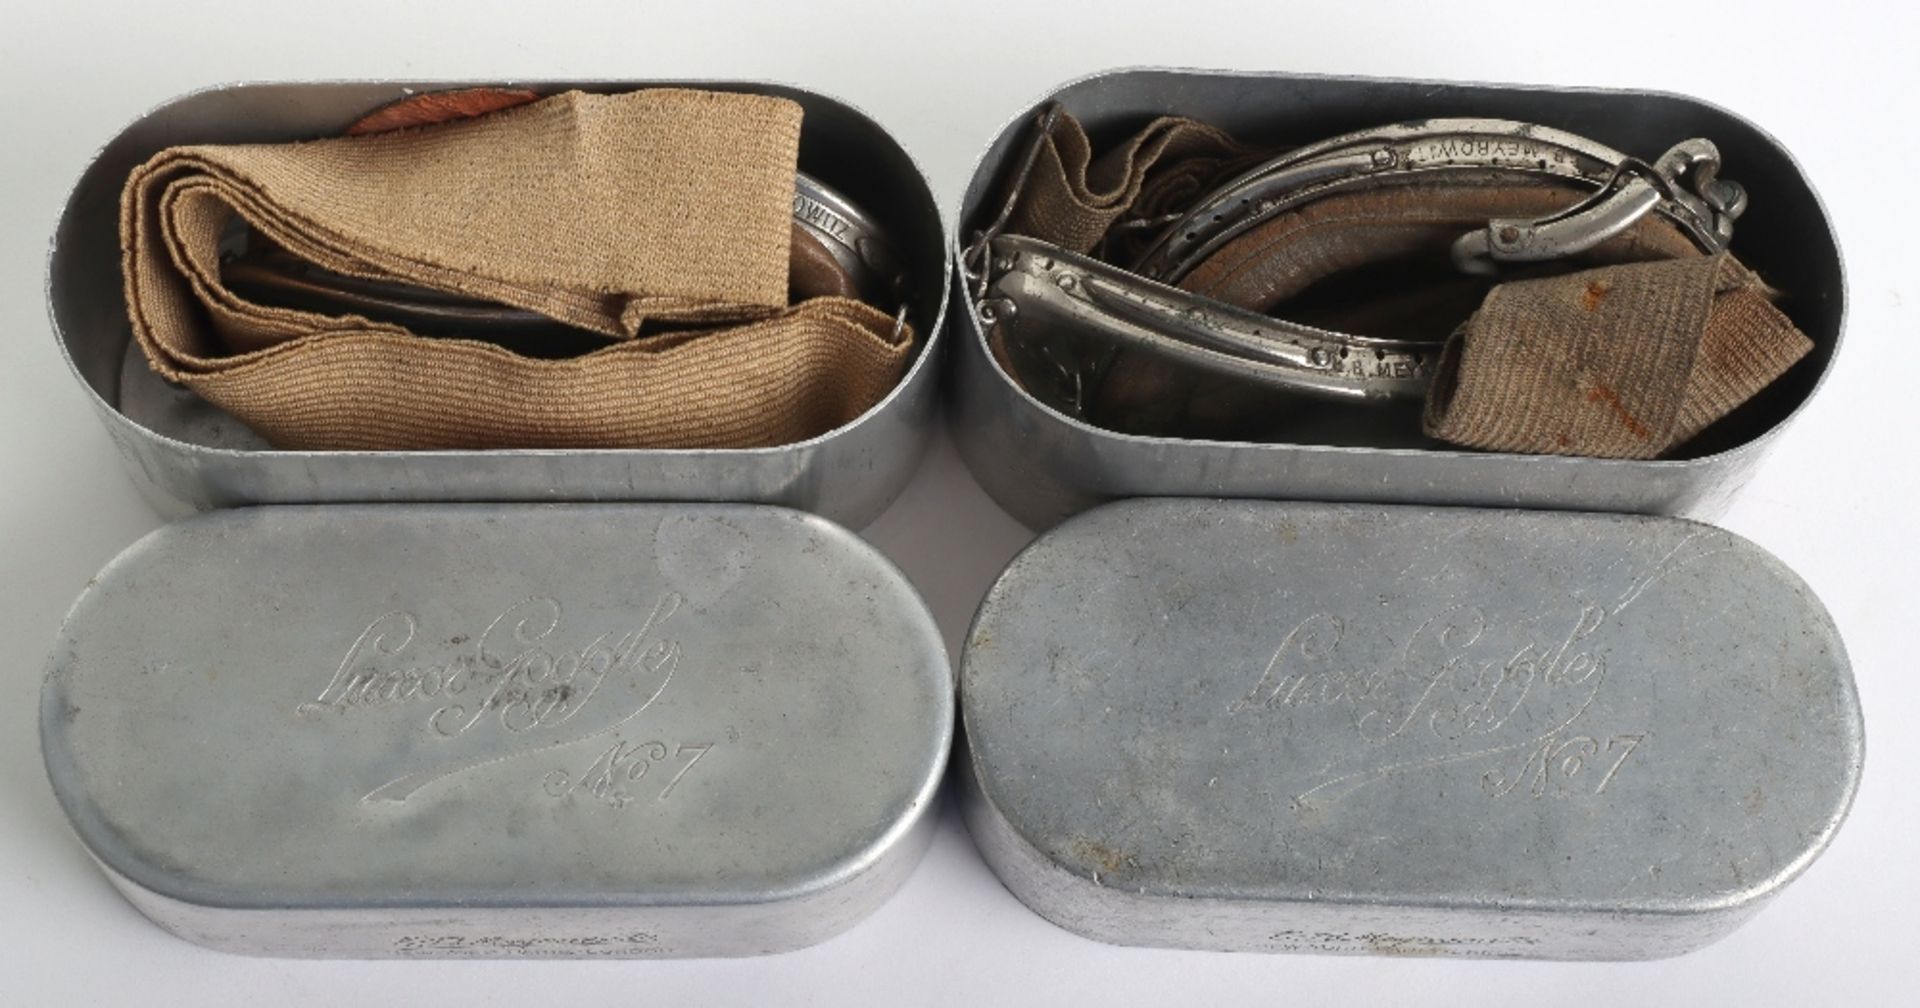 2x Pairs of Aviators Luxor Goggles No7 by E B Meyrowitz - Image 4 of 4